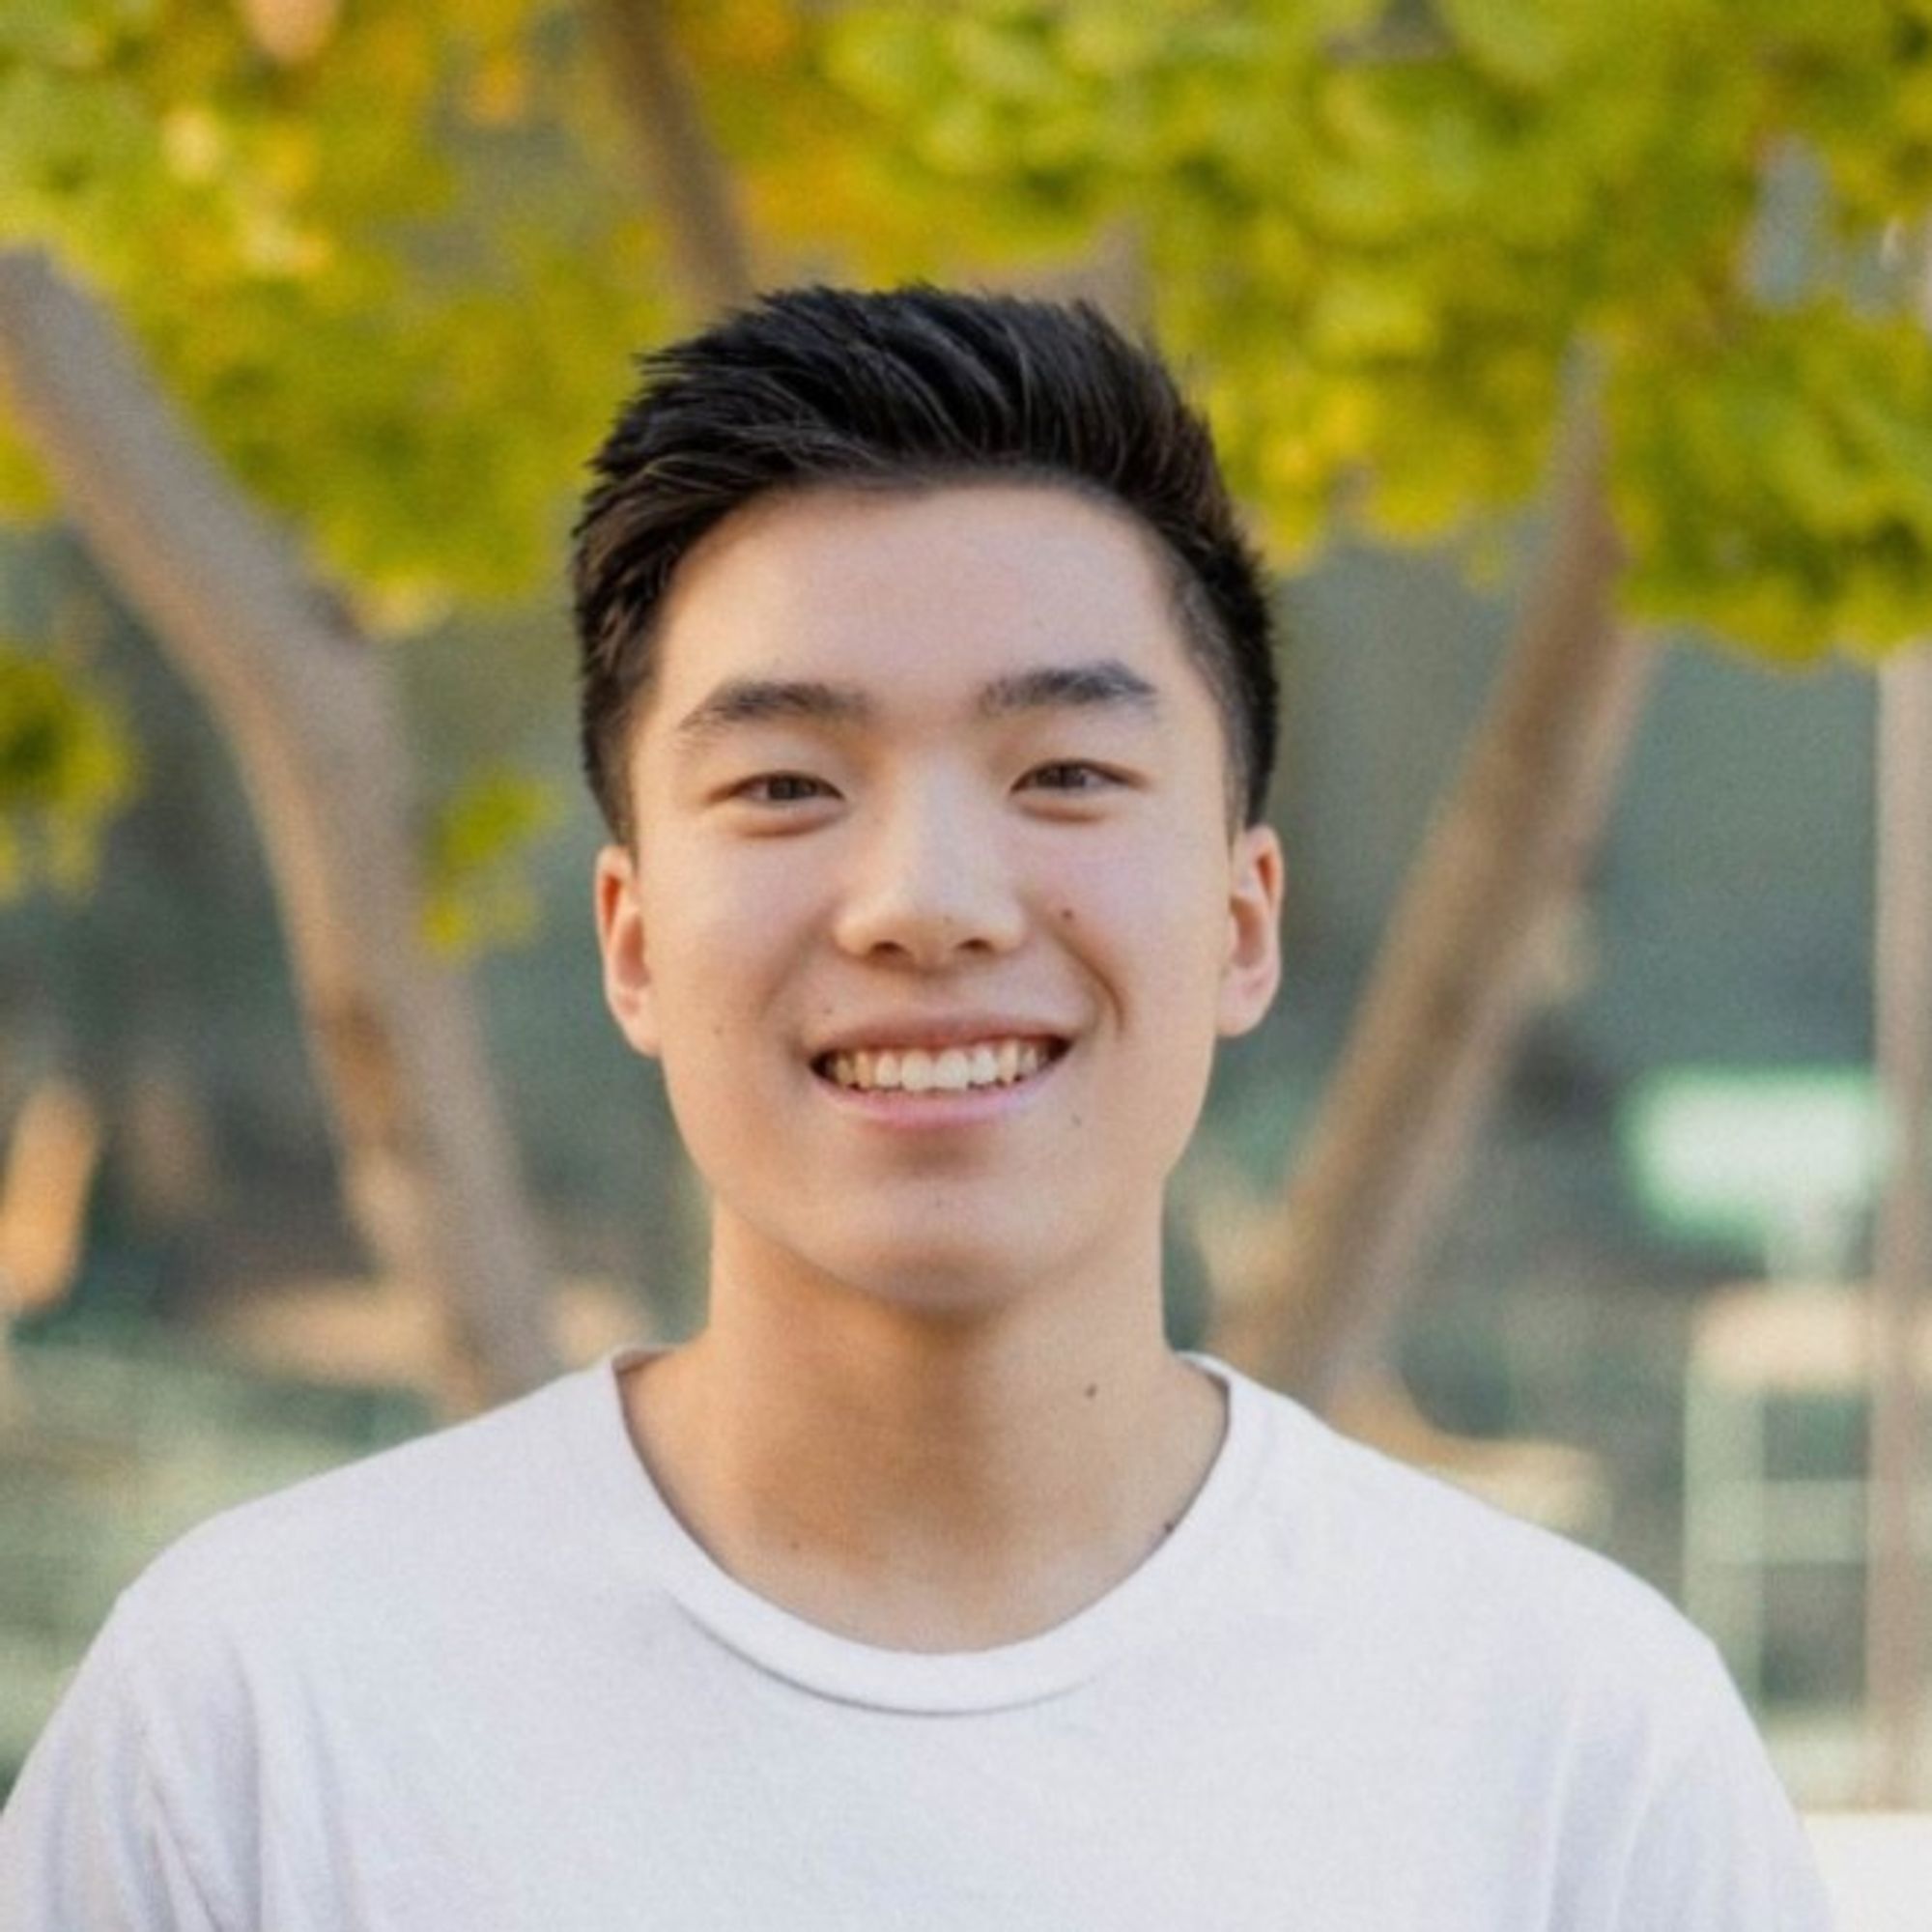 Warren Wang
Software Engineer
Former Eng Intern @ Figma, Scale AI, Gusto • Loves basketball and boba